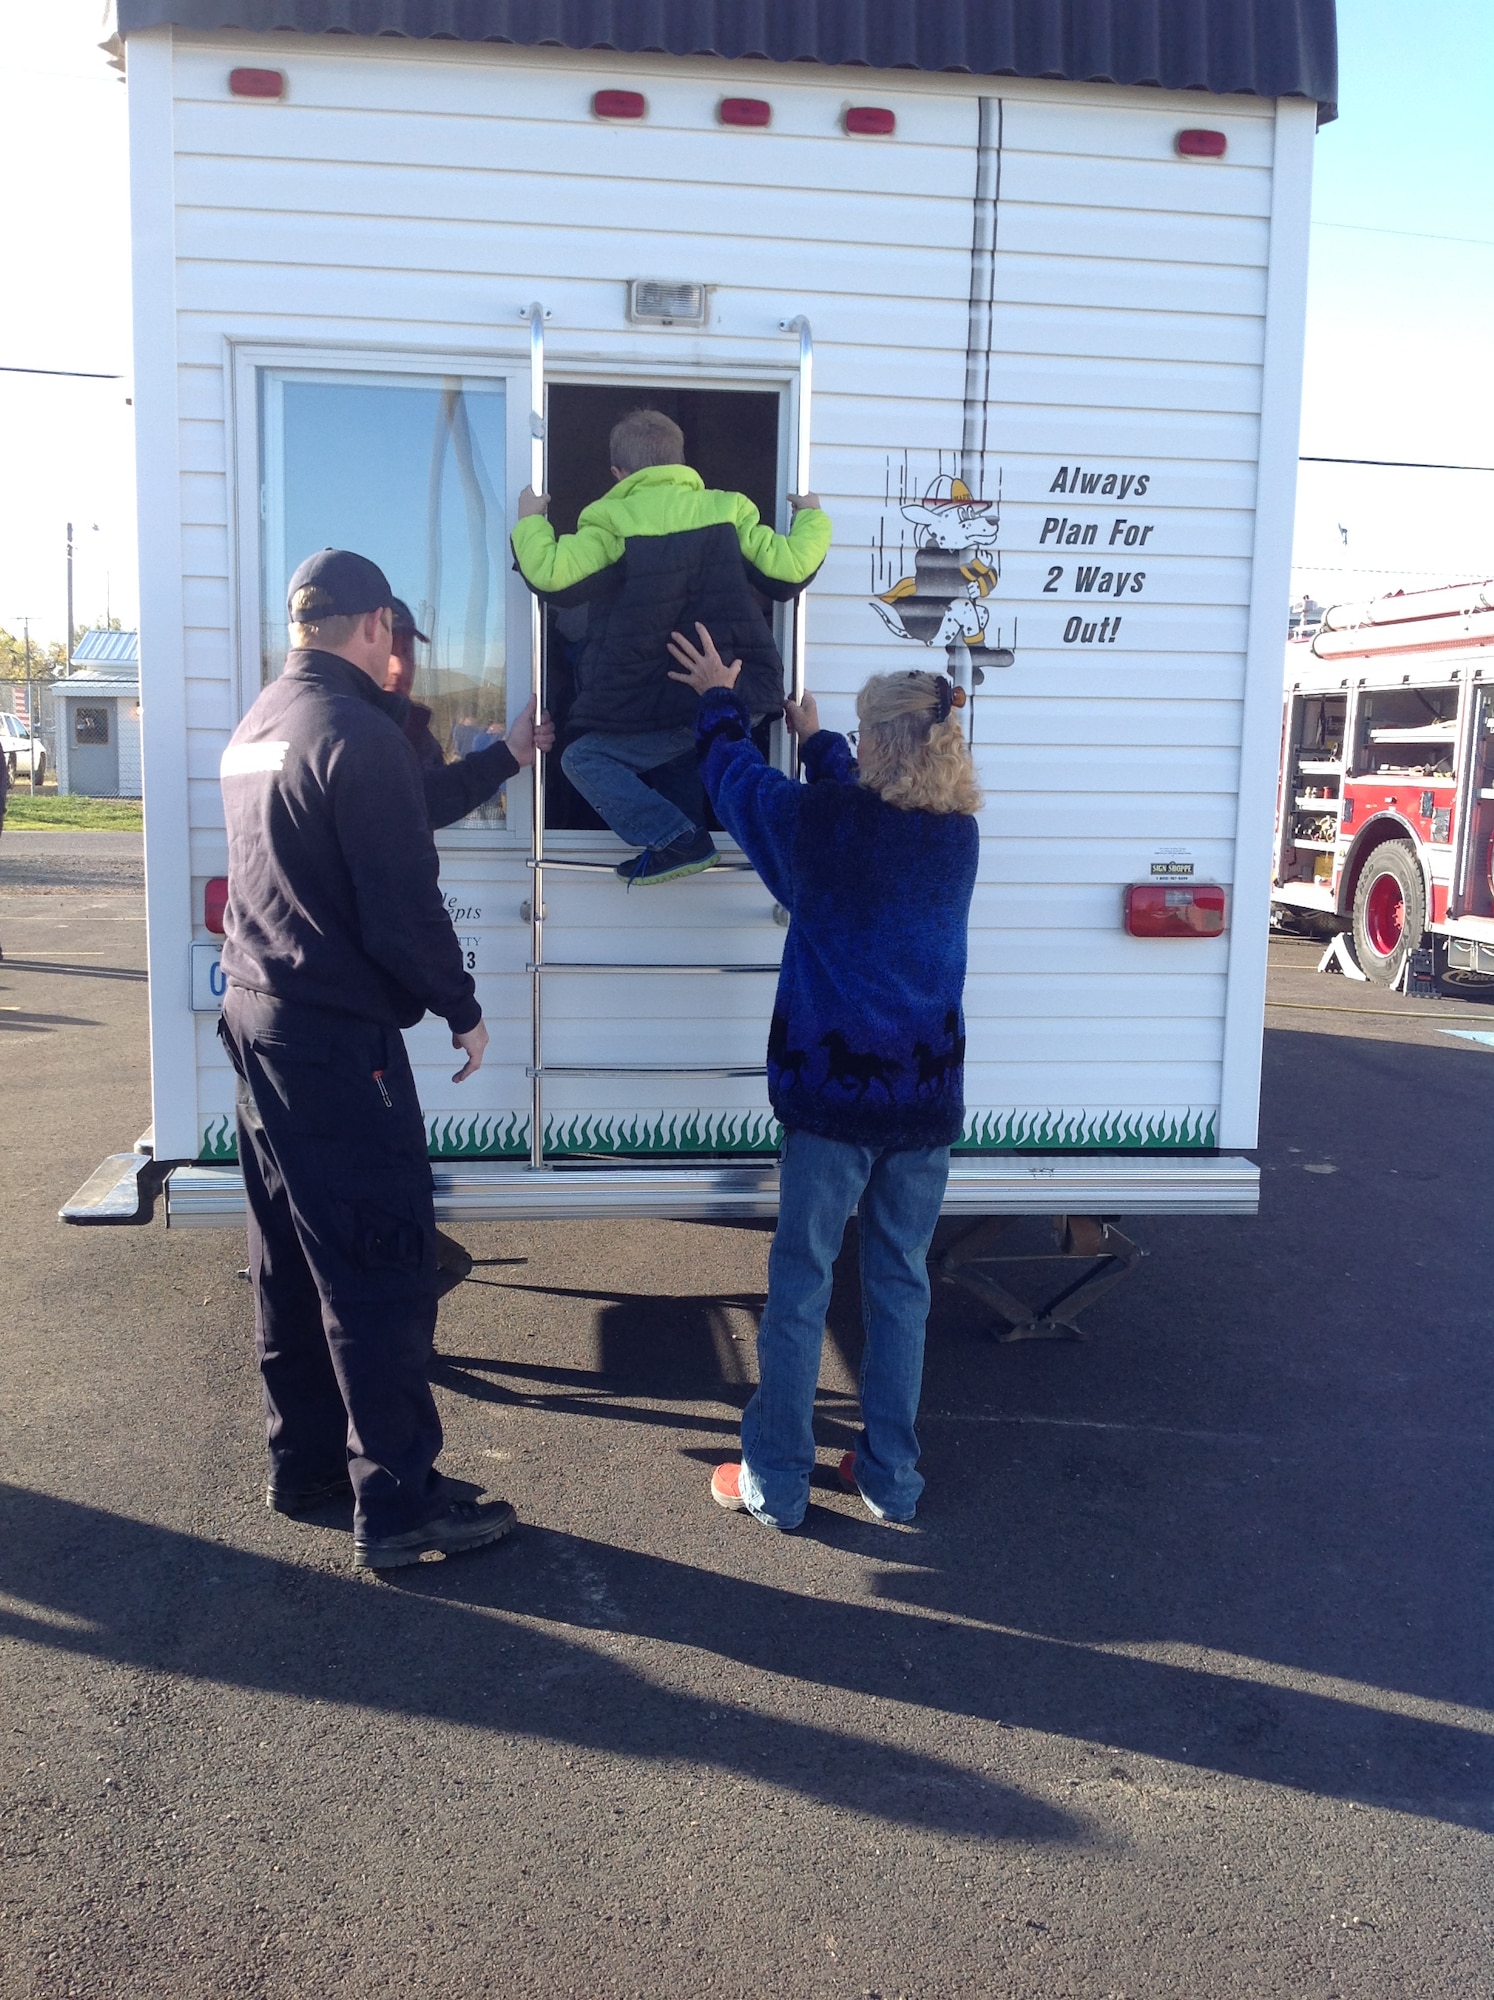 A trainer is helping a student practice exiting through a window properly in case of a fire. The fire prevention trailer was used by members of the 120th Airlift Wing’s Fire Department during an educational visit to local public schools in Cascade County, Mont. (Photo by Terry Rutherford/Released)